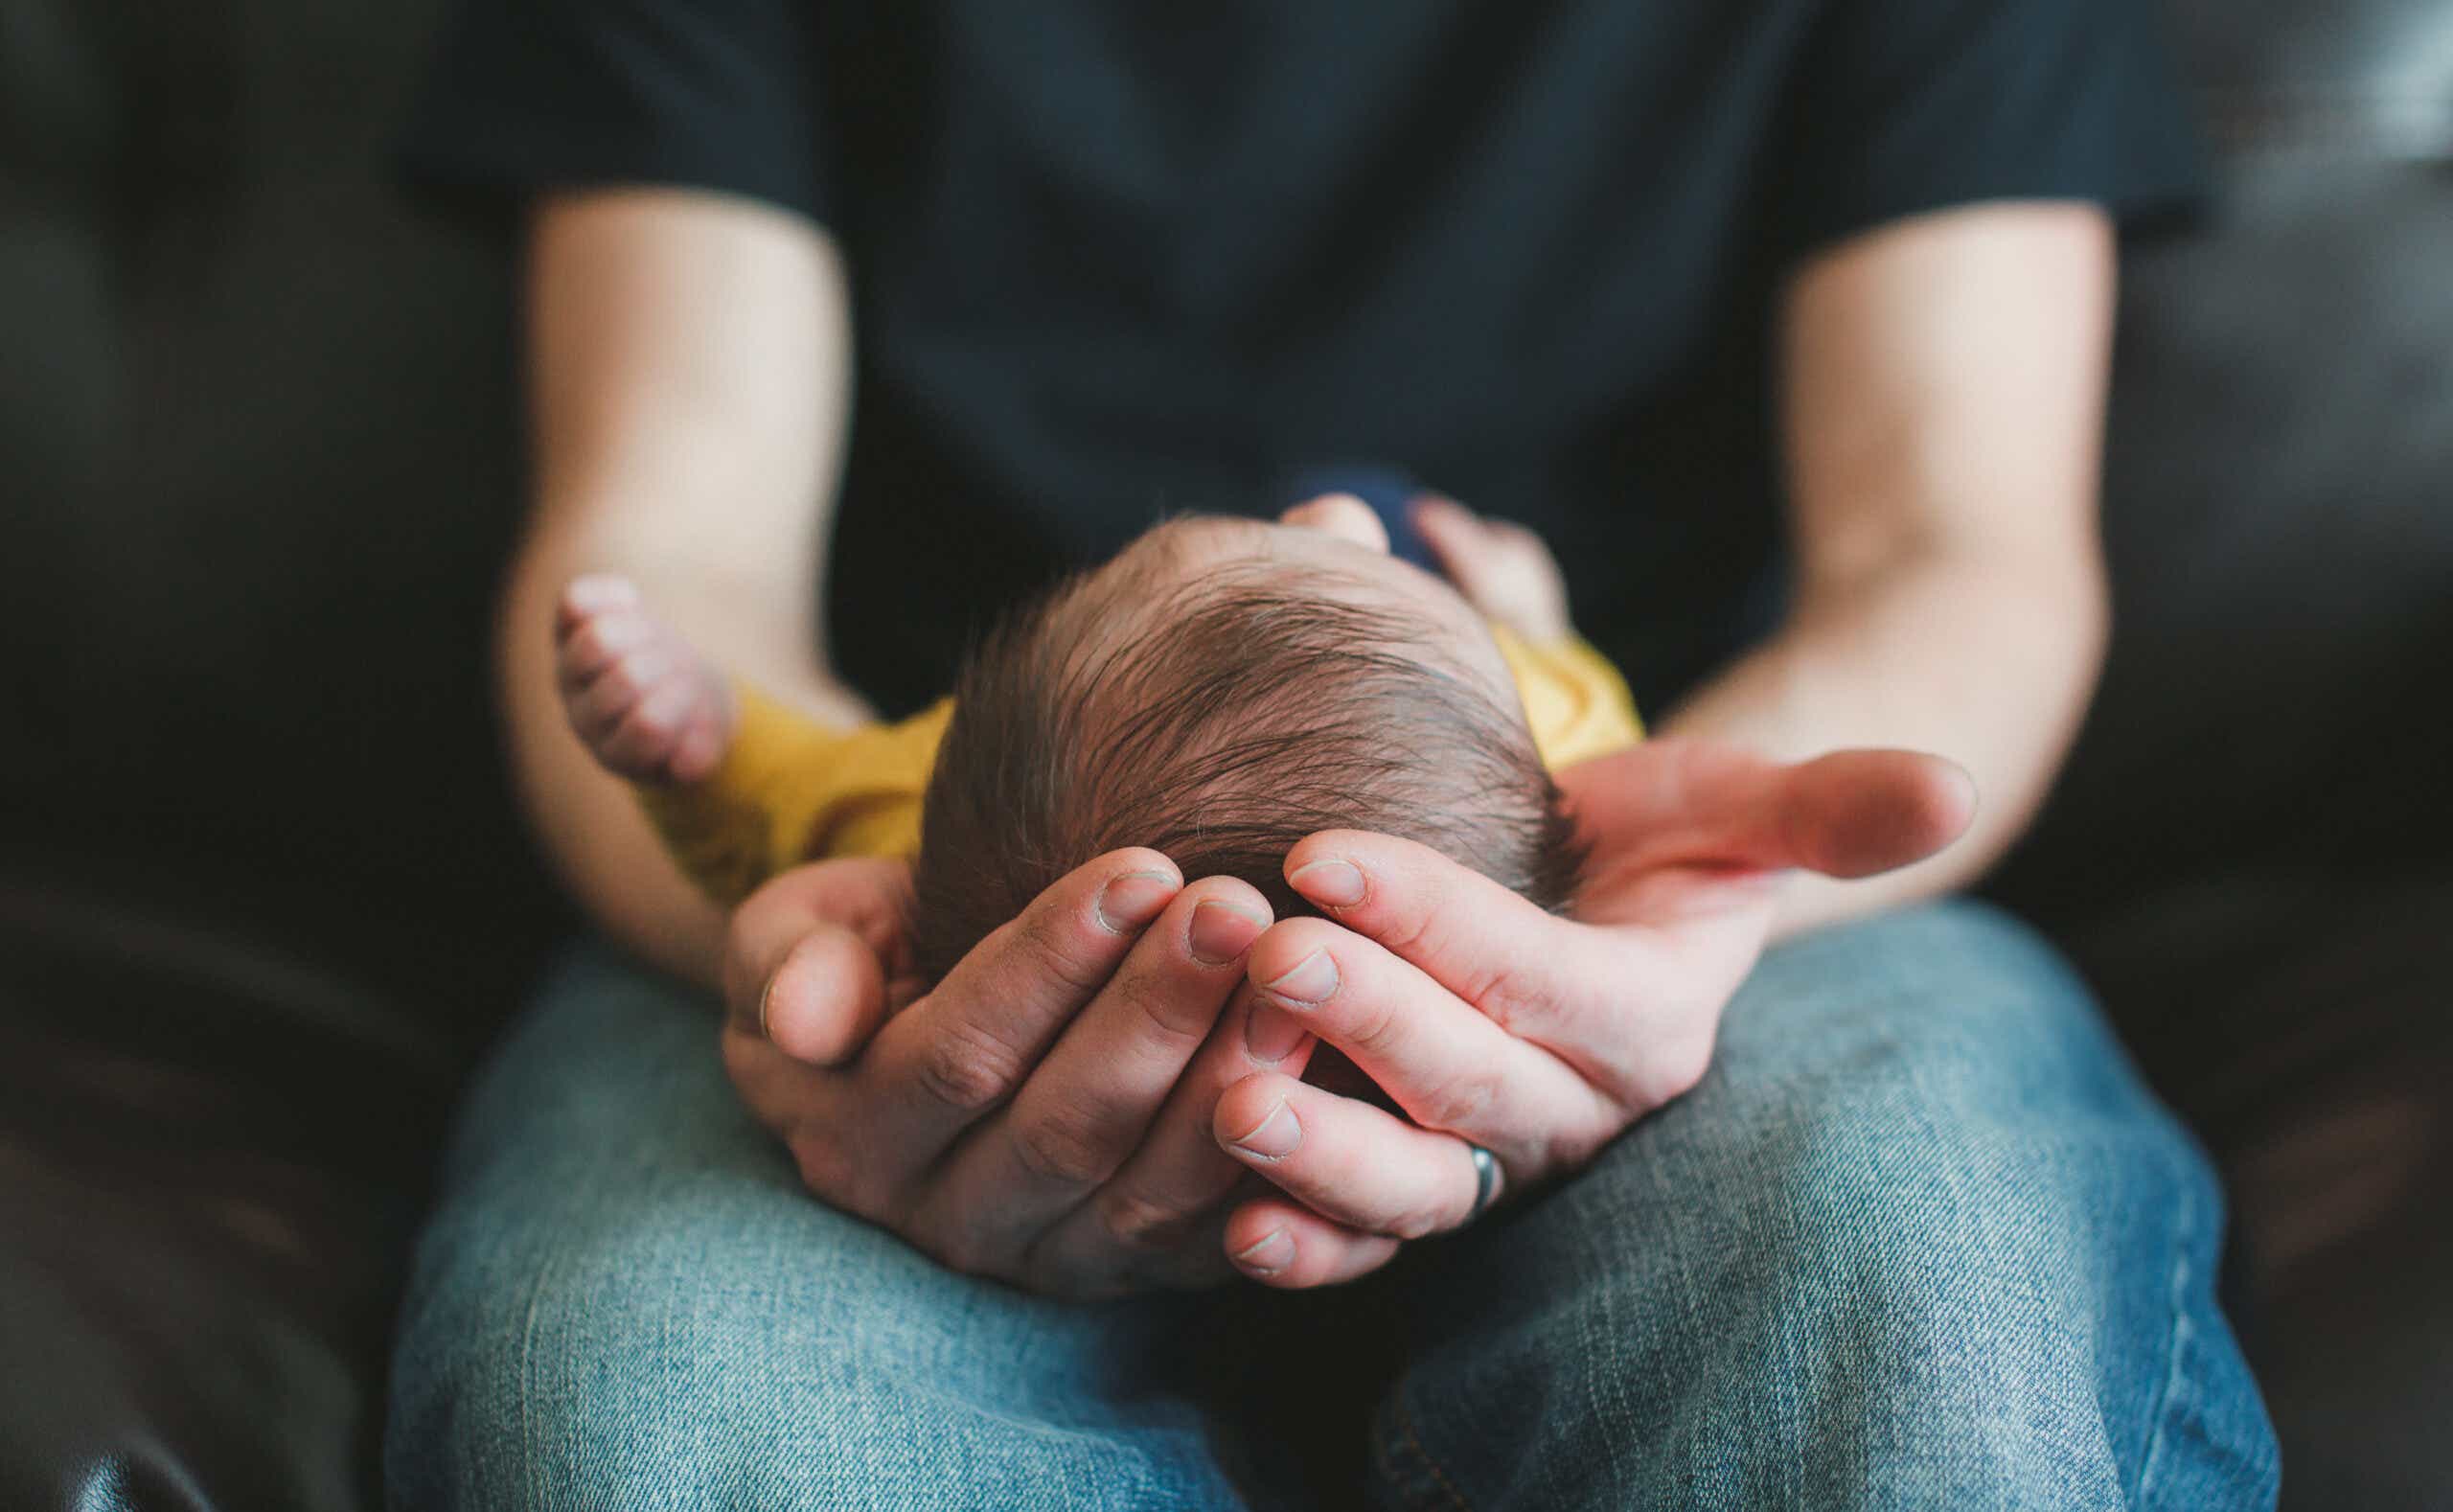 Father's hands holding newborn